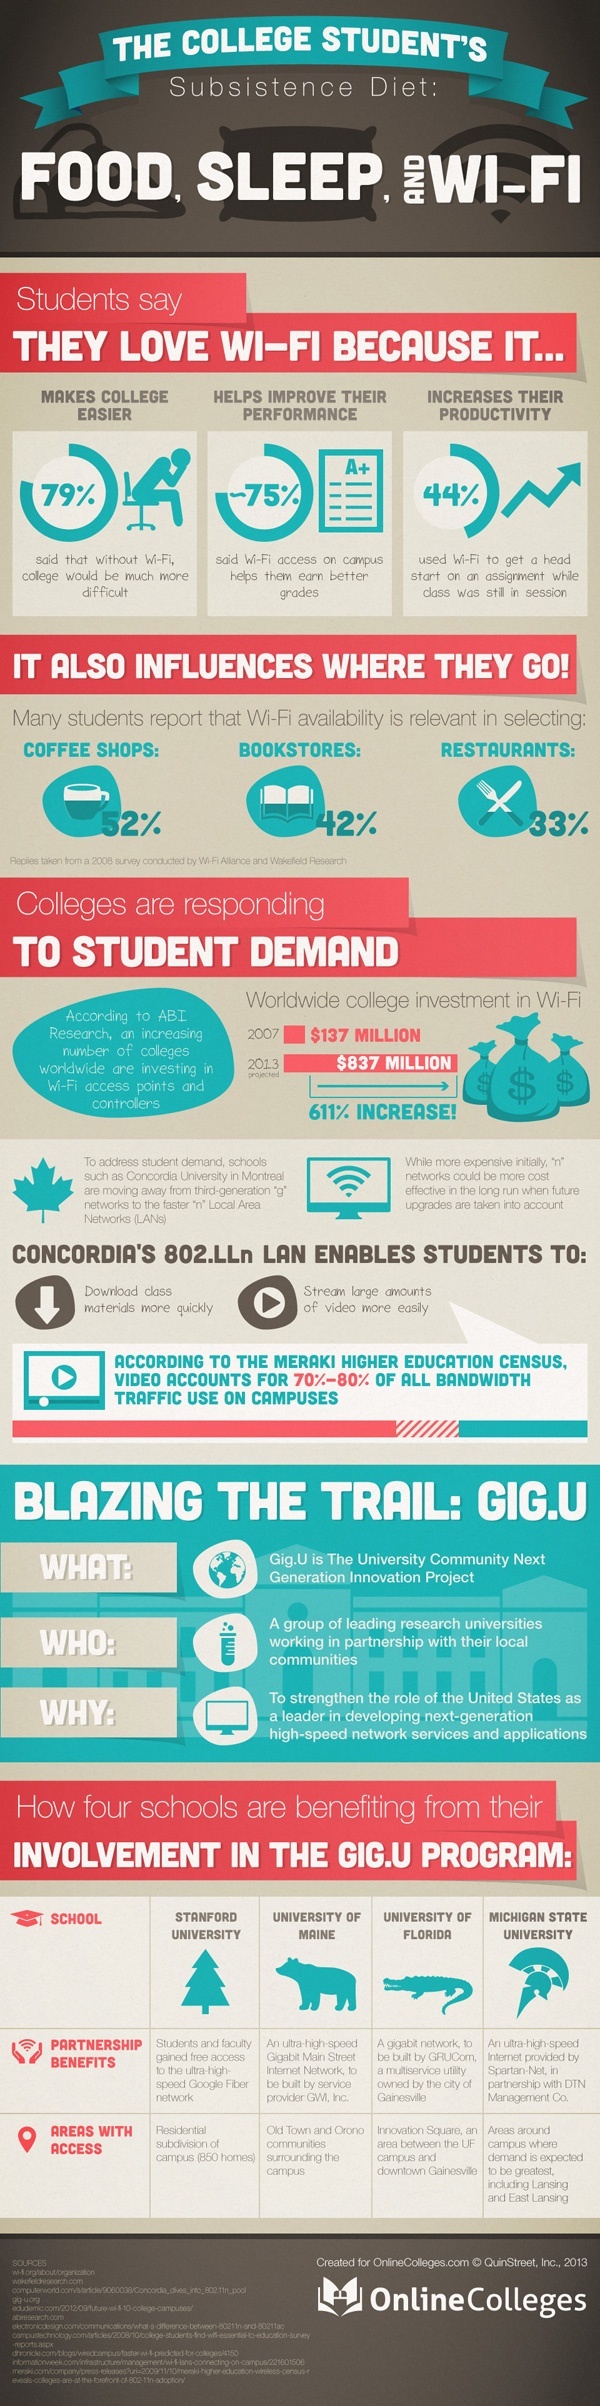 375917-infographic-college-campus-wi-fi